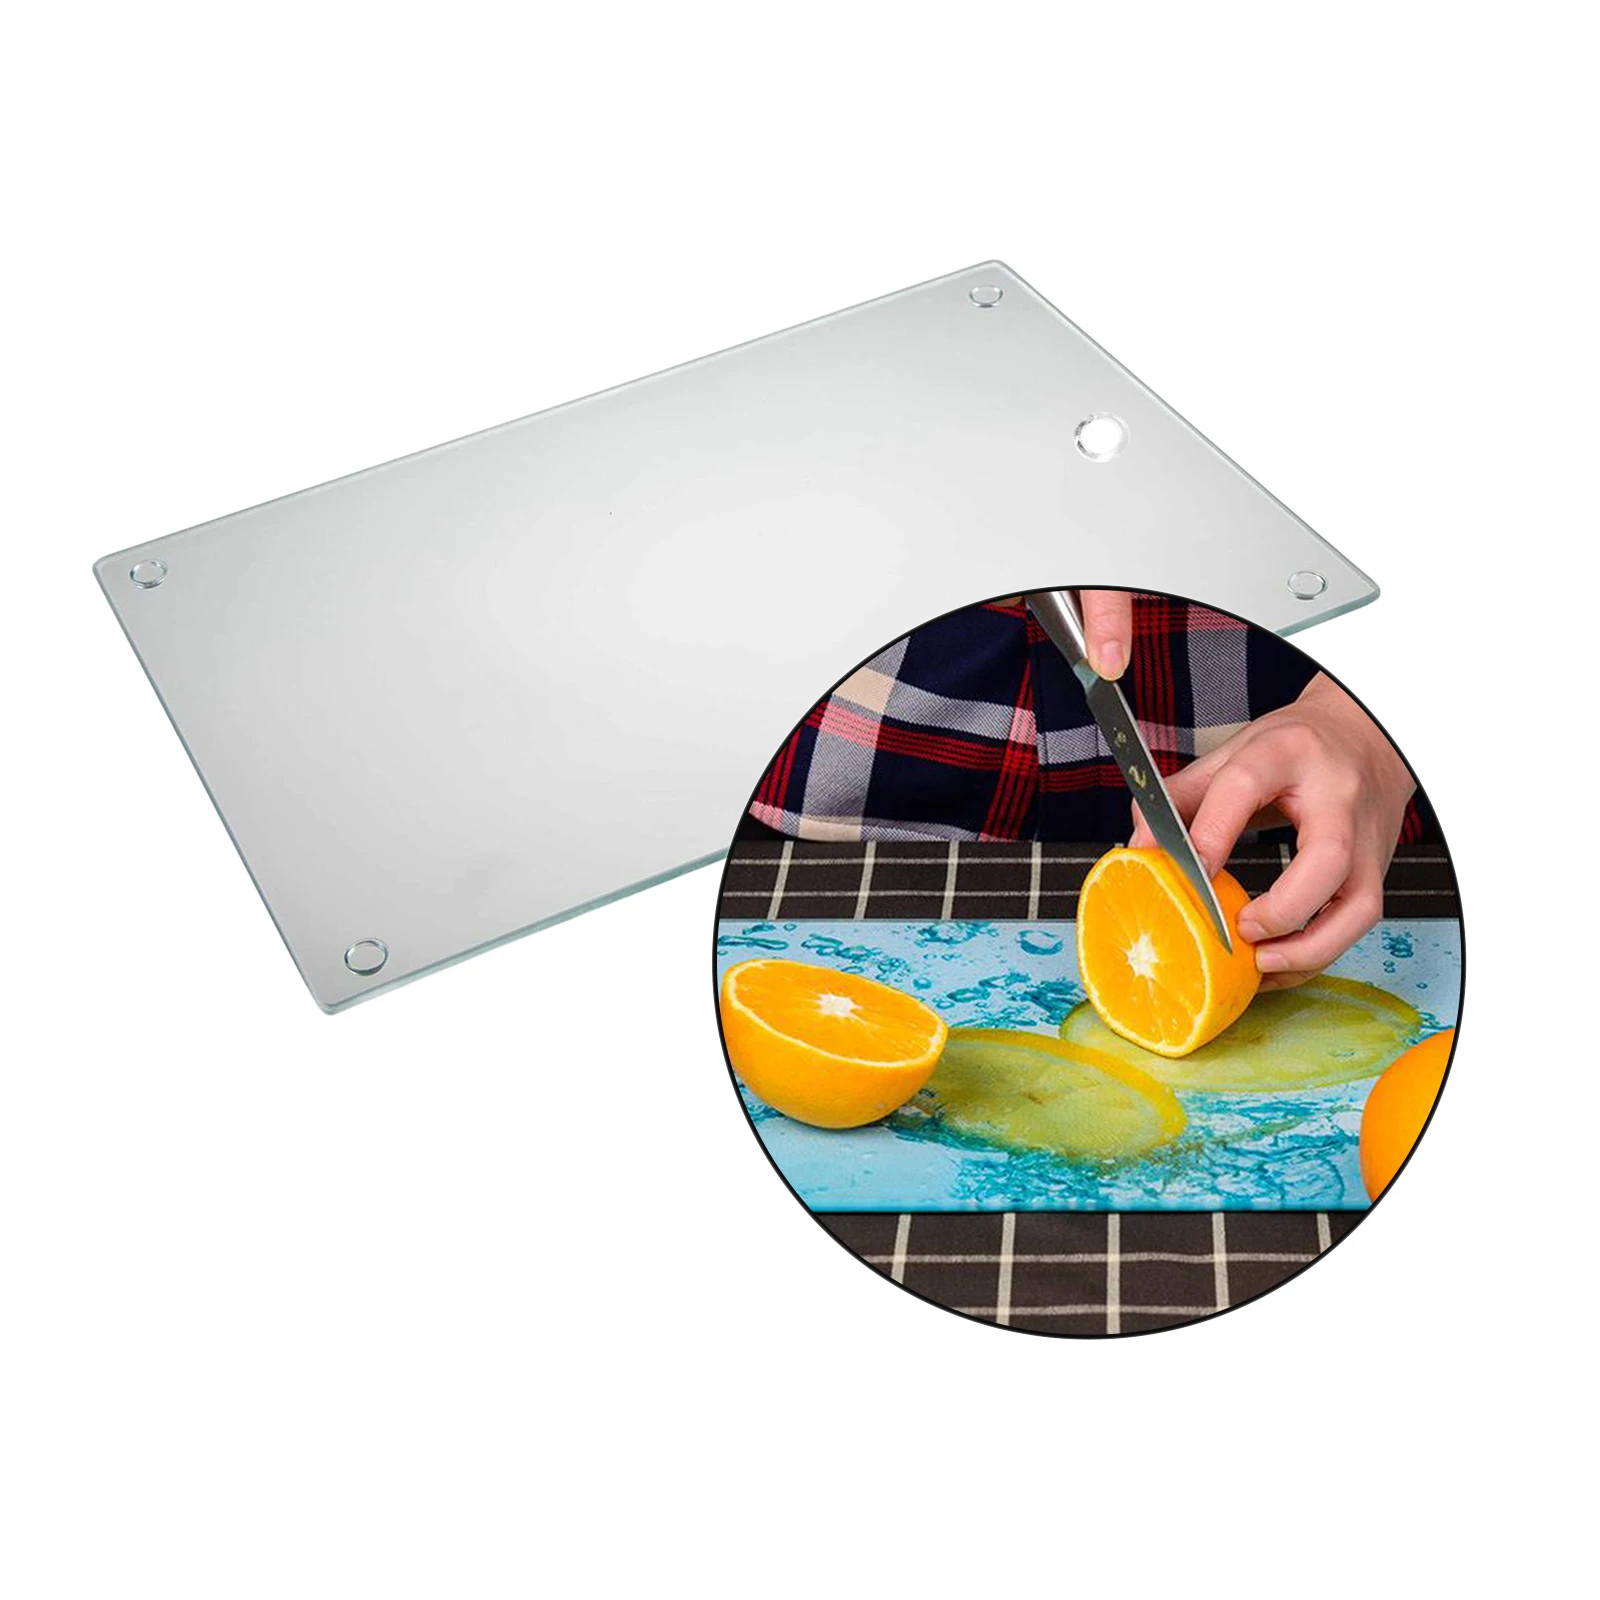 https://ae01.alicdn.com/kf/H29d81908750f4a069b1a617ab7b79d23P/40x30cm-Tempered-Glass-Kitchen-Chopping-Board-Anti-Scratch-Shatter-Resistant-Also-Can-Be-Used-As-a.jpg